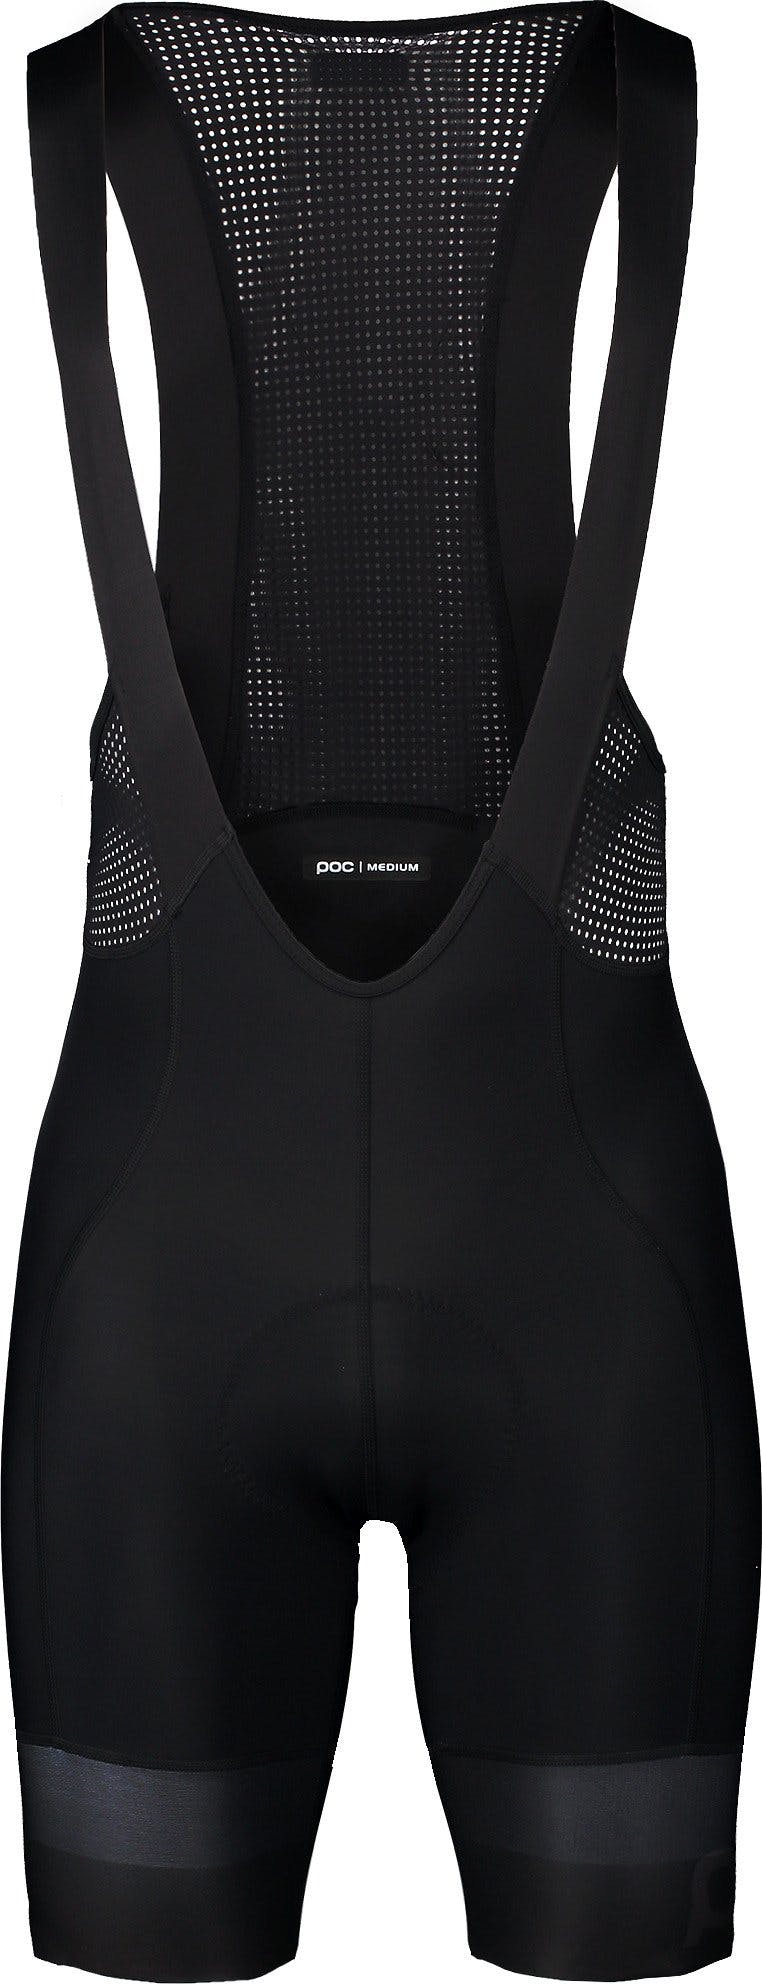 Product image for Essential Road VPDS Bib Shorts - Unisex